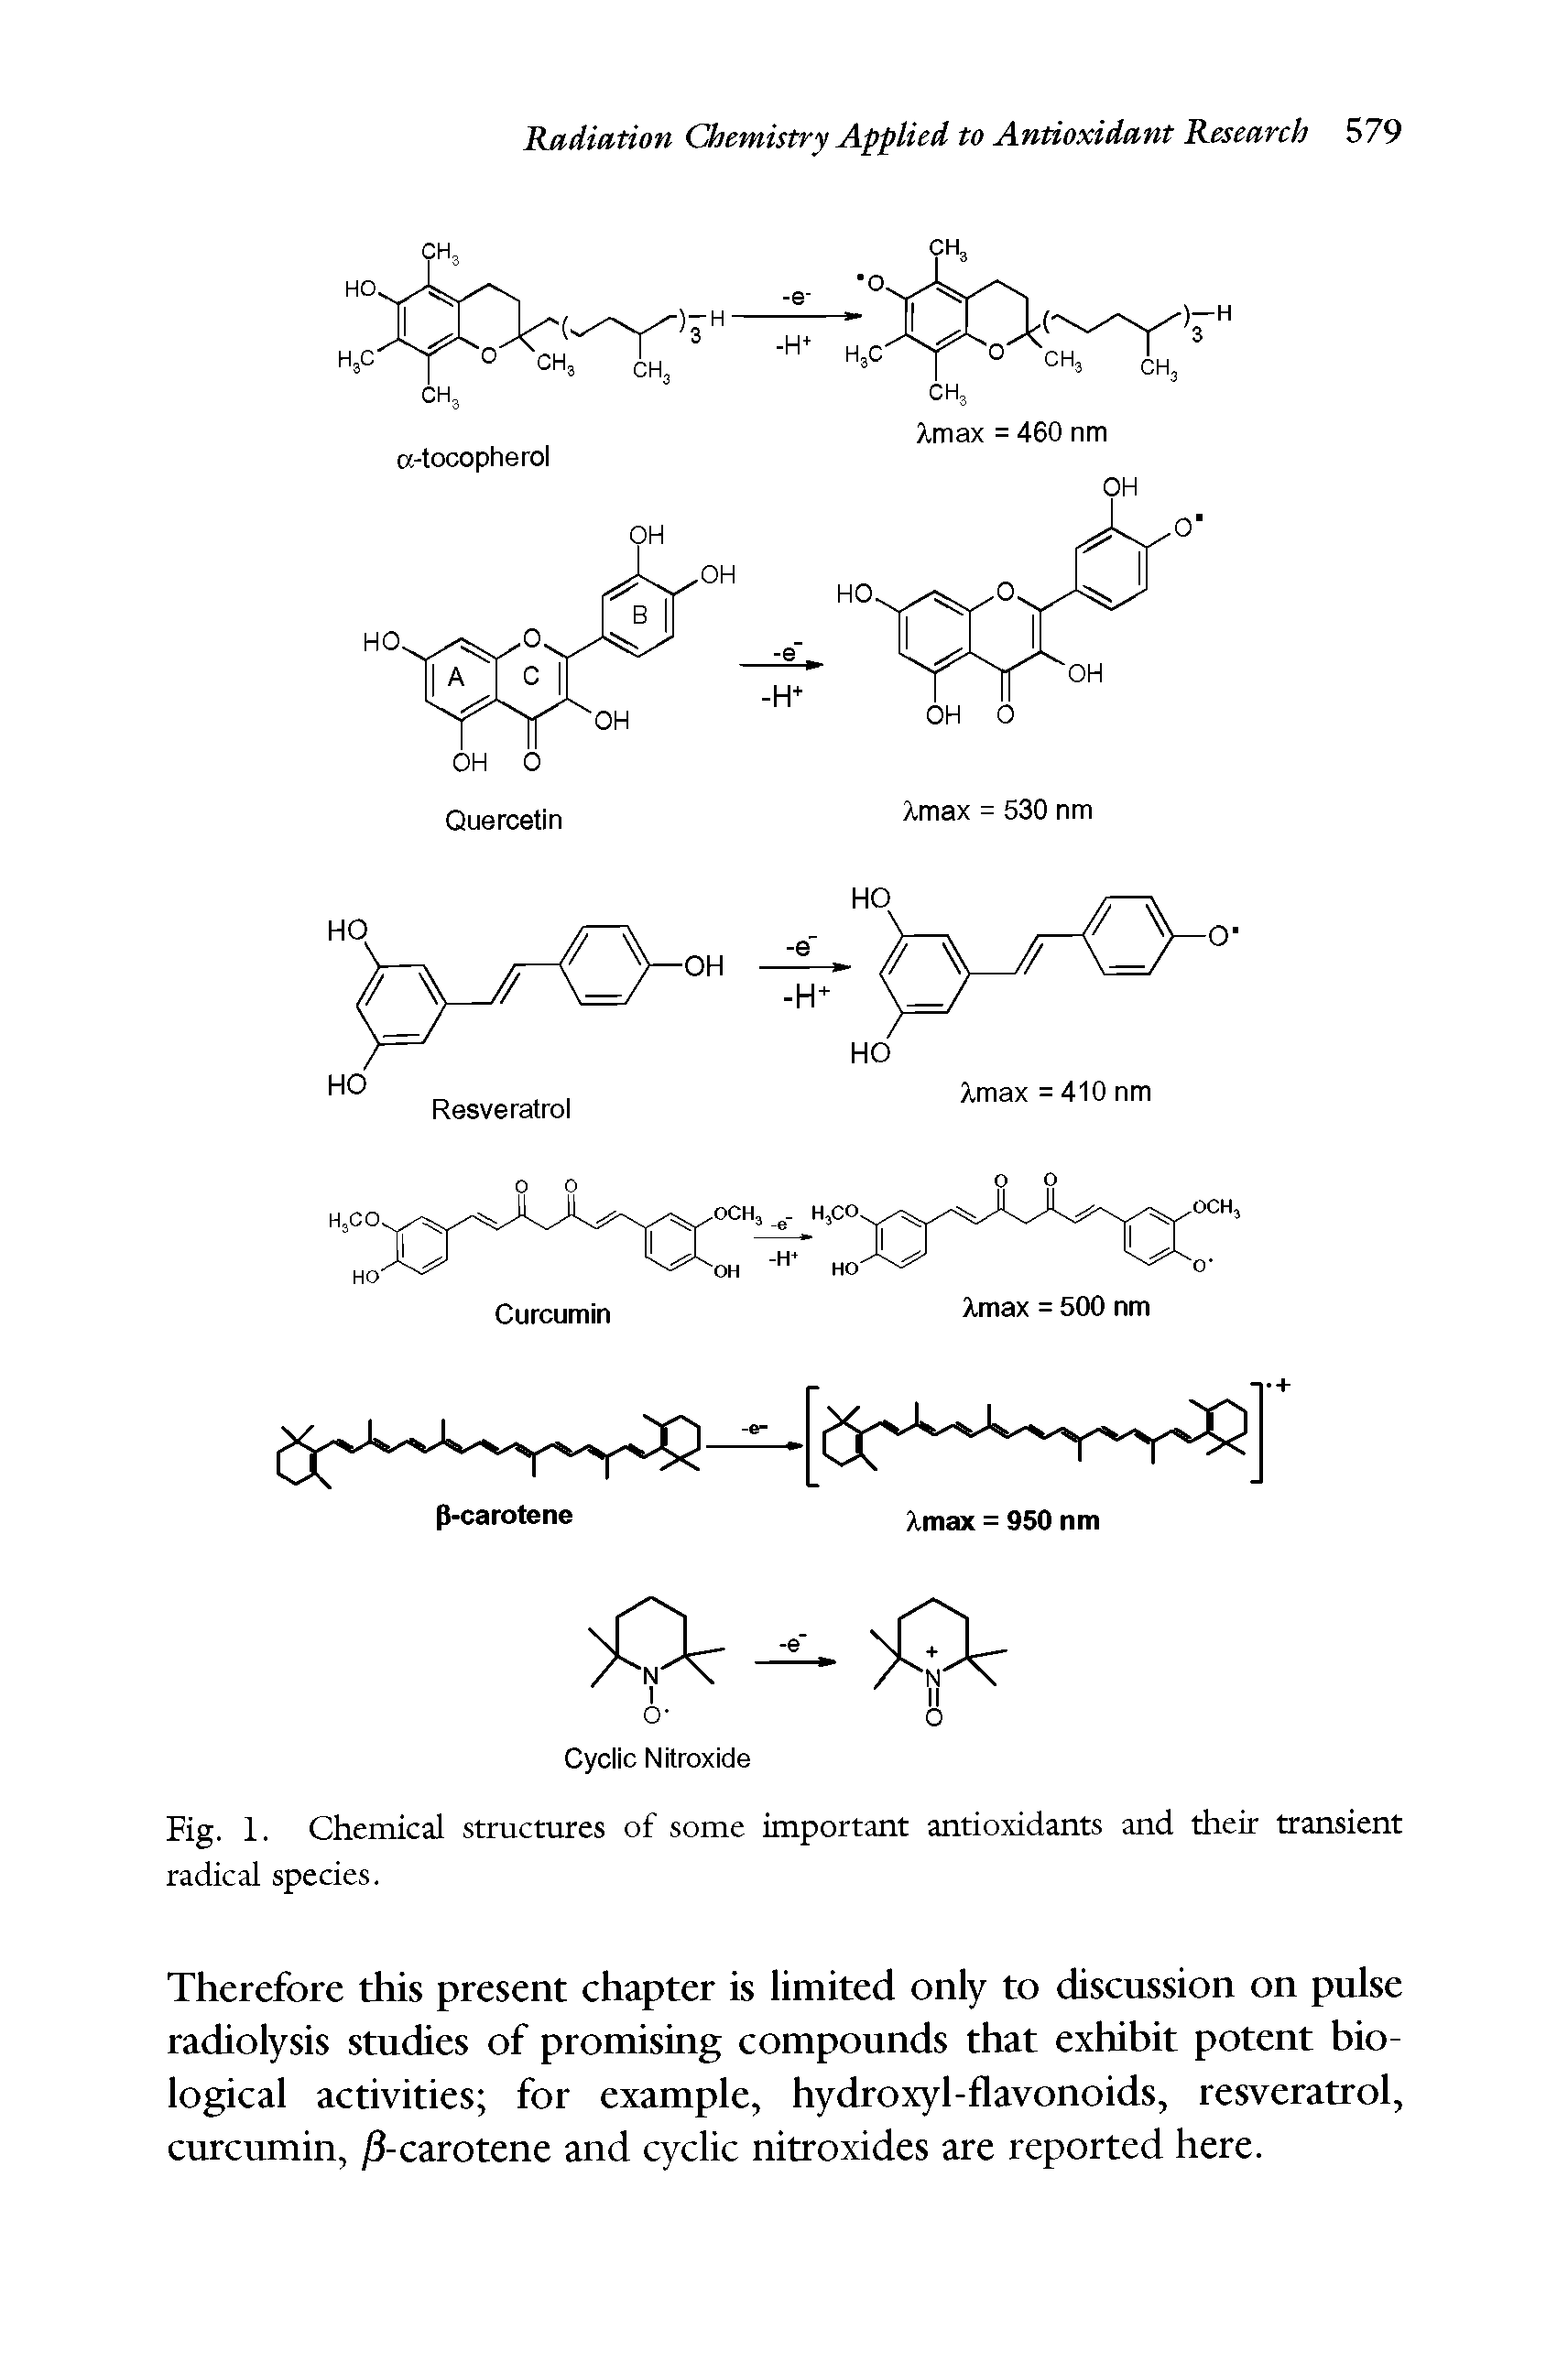 Fig. 1. Chemical structures of some important antioxidants and their transient radical species.